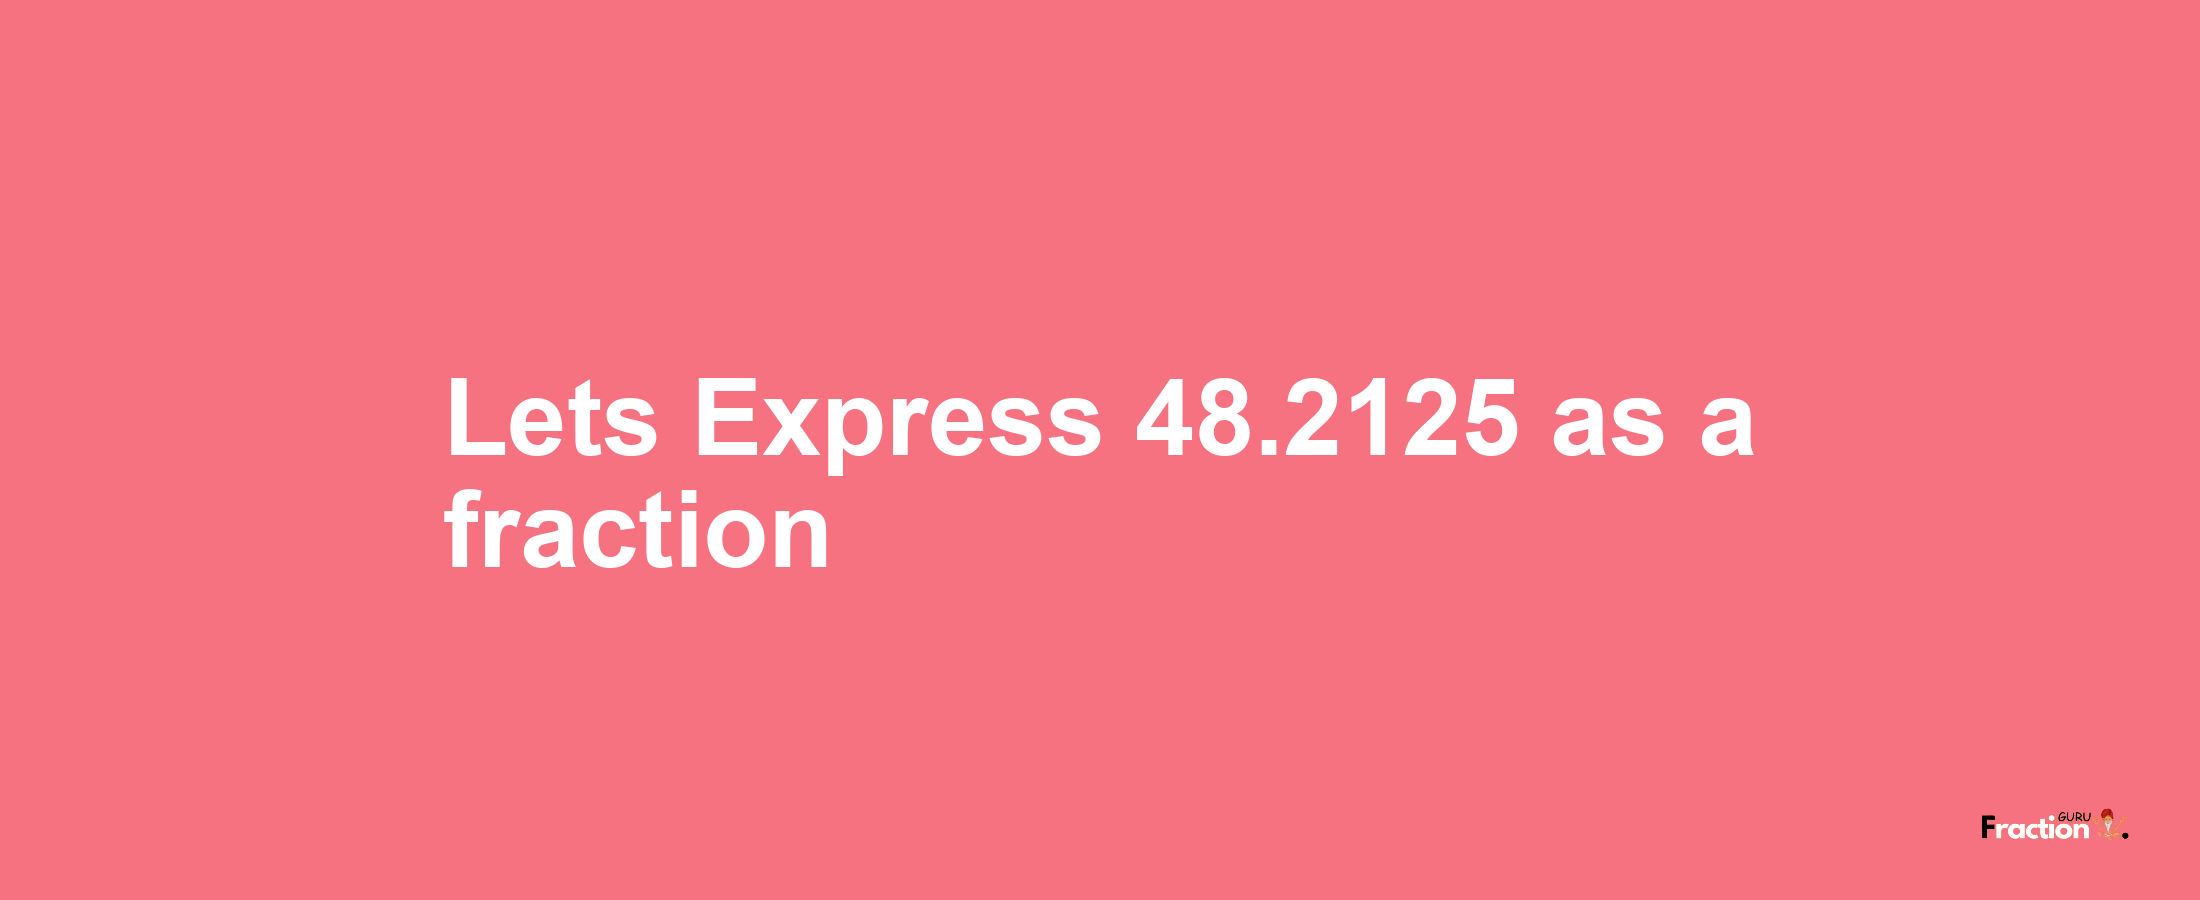 Lets Express 48.2125 as afraction